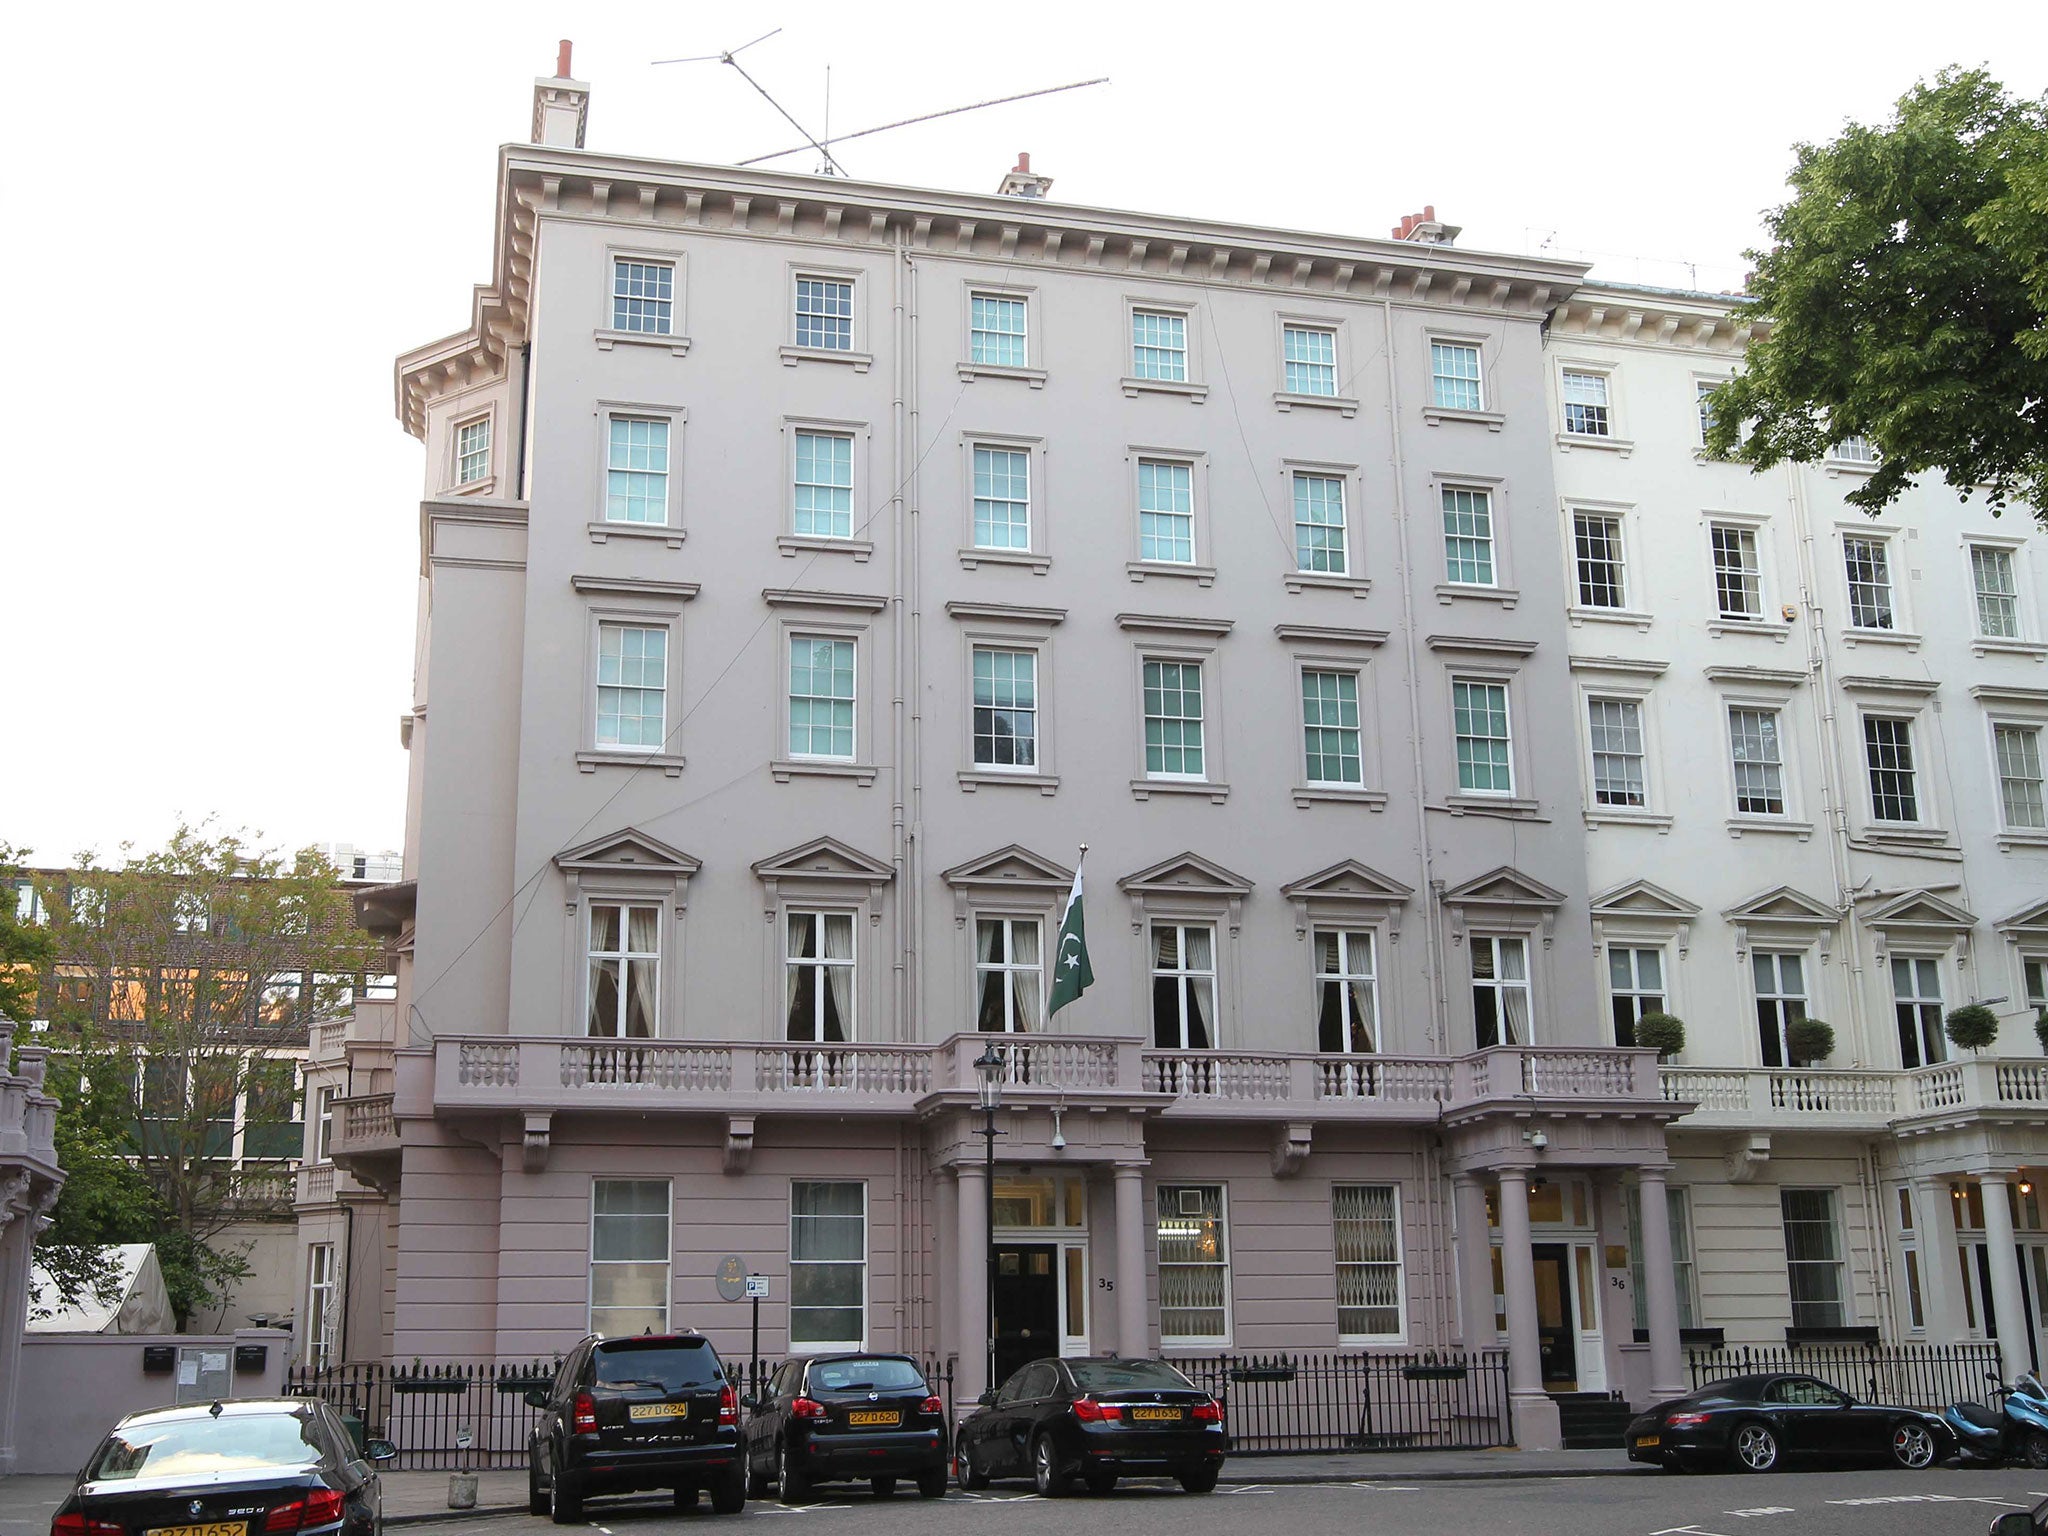 The officials are based in Pakistan’s Knightsbridge embassy